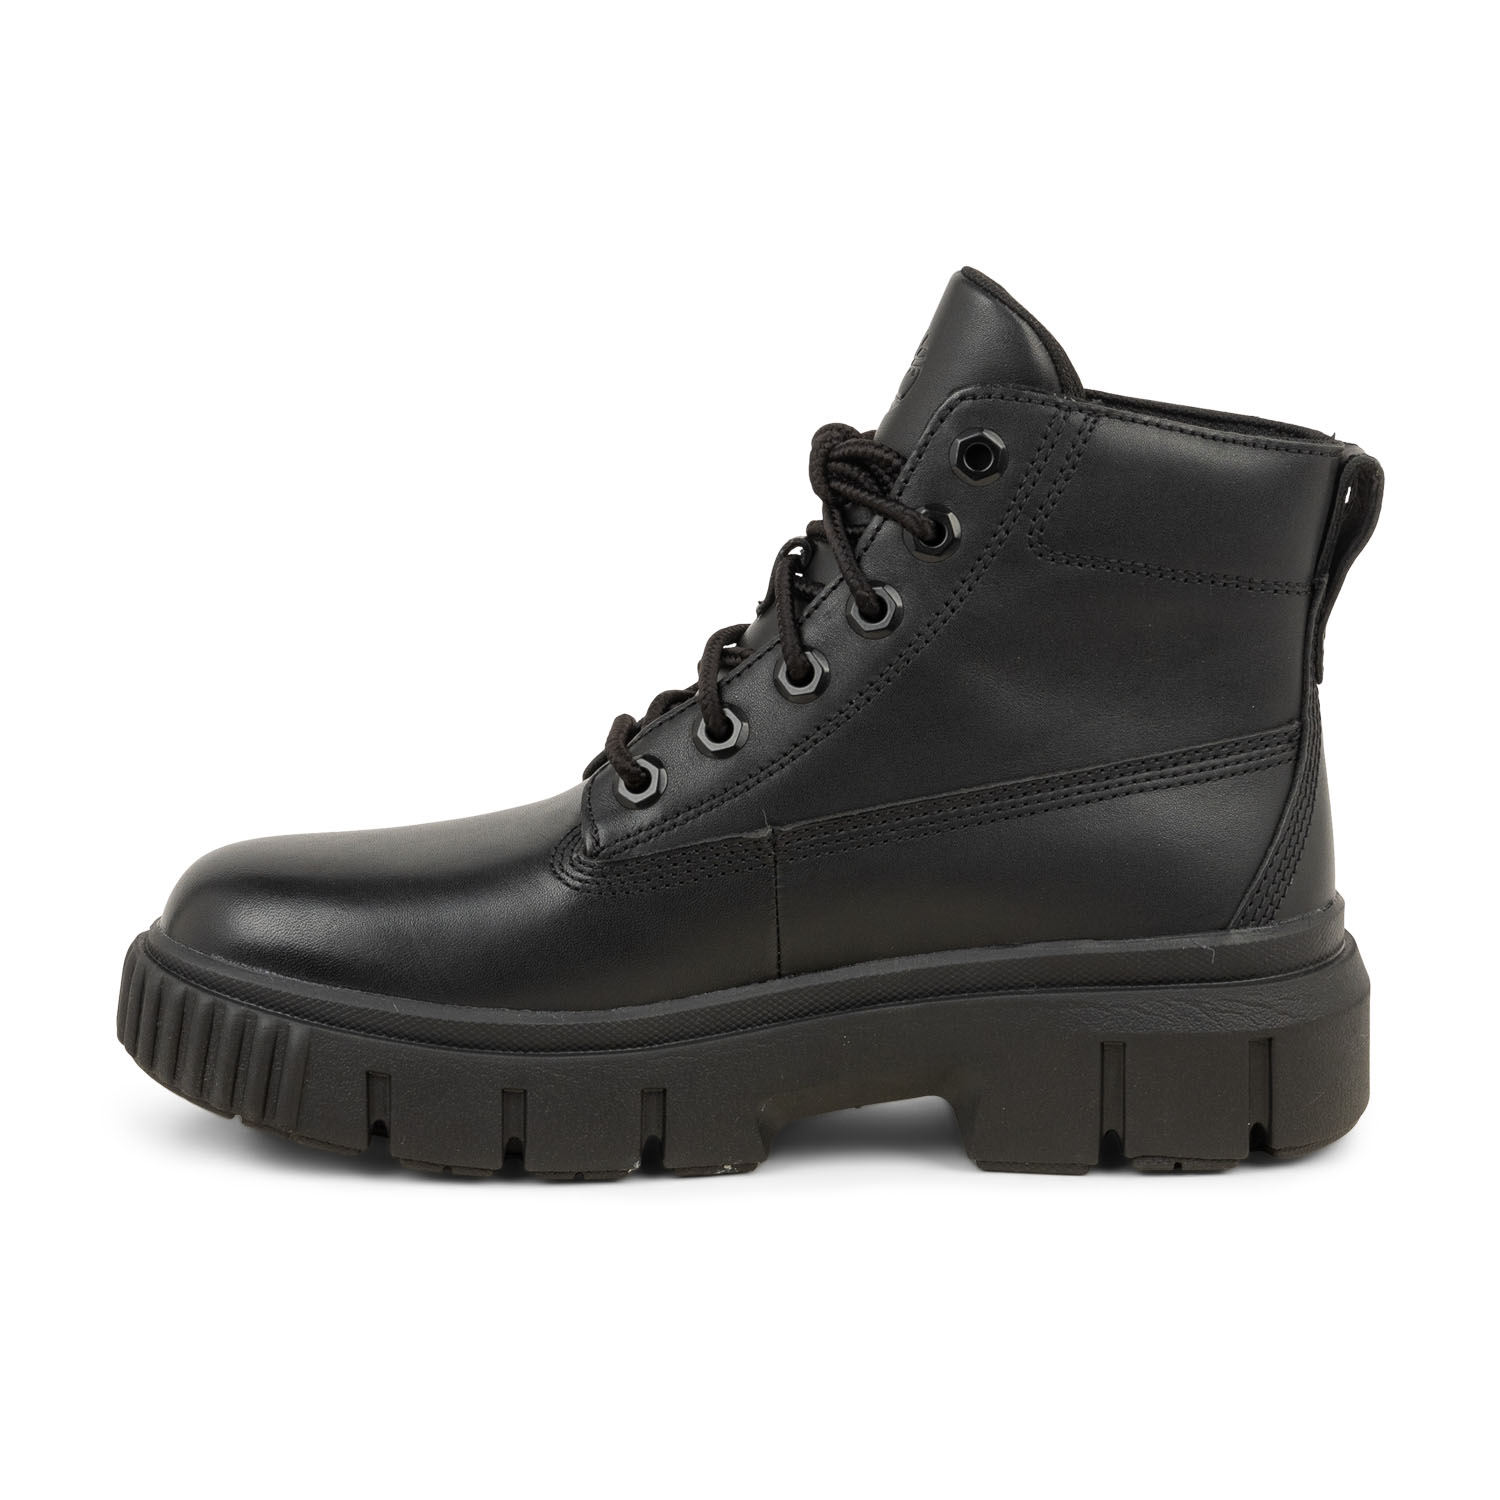 04 - GREYFIELD - TIMBERLAND - Boots et bottines - Cuir